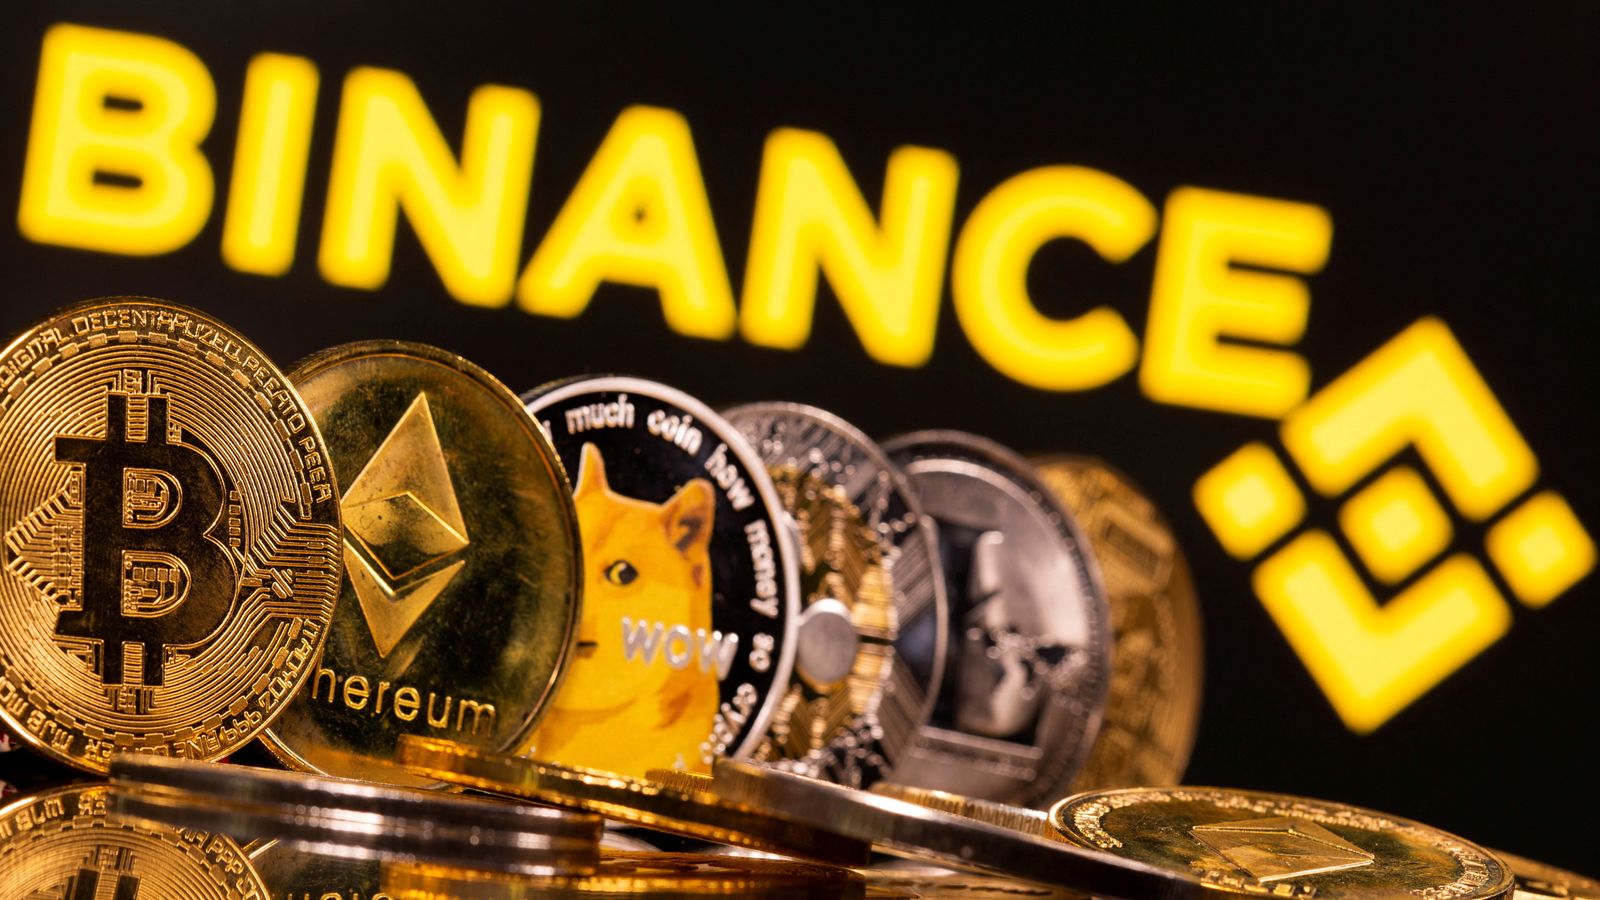 Binance is sued by another US regulator, sparking plunge in cryptocurrency values and shares